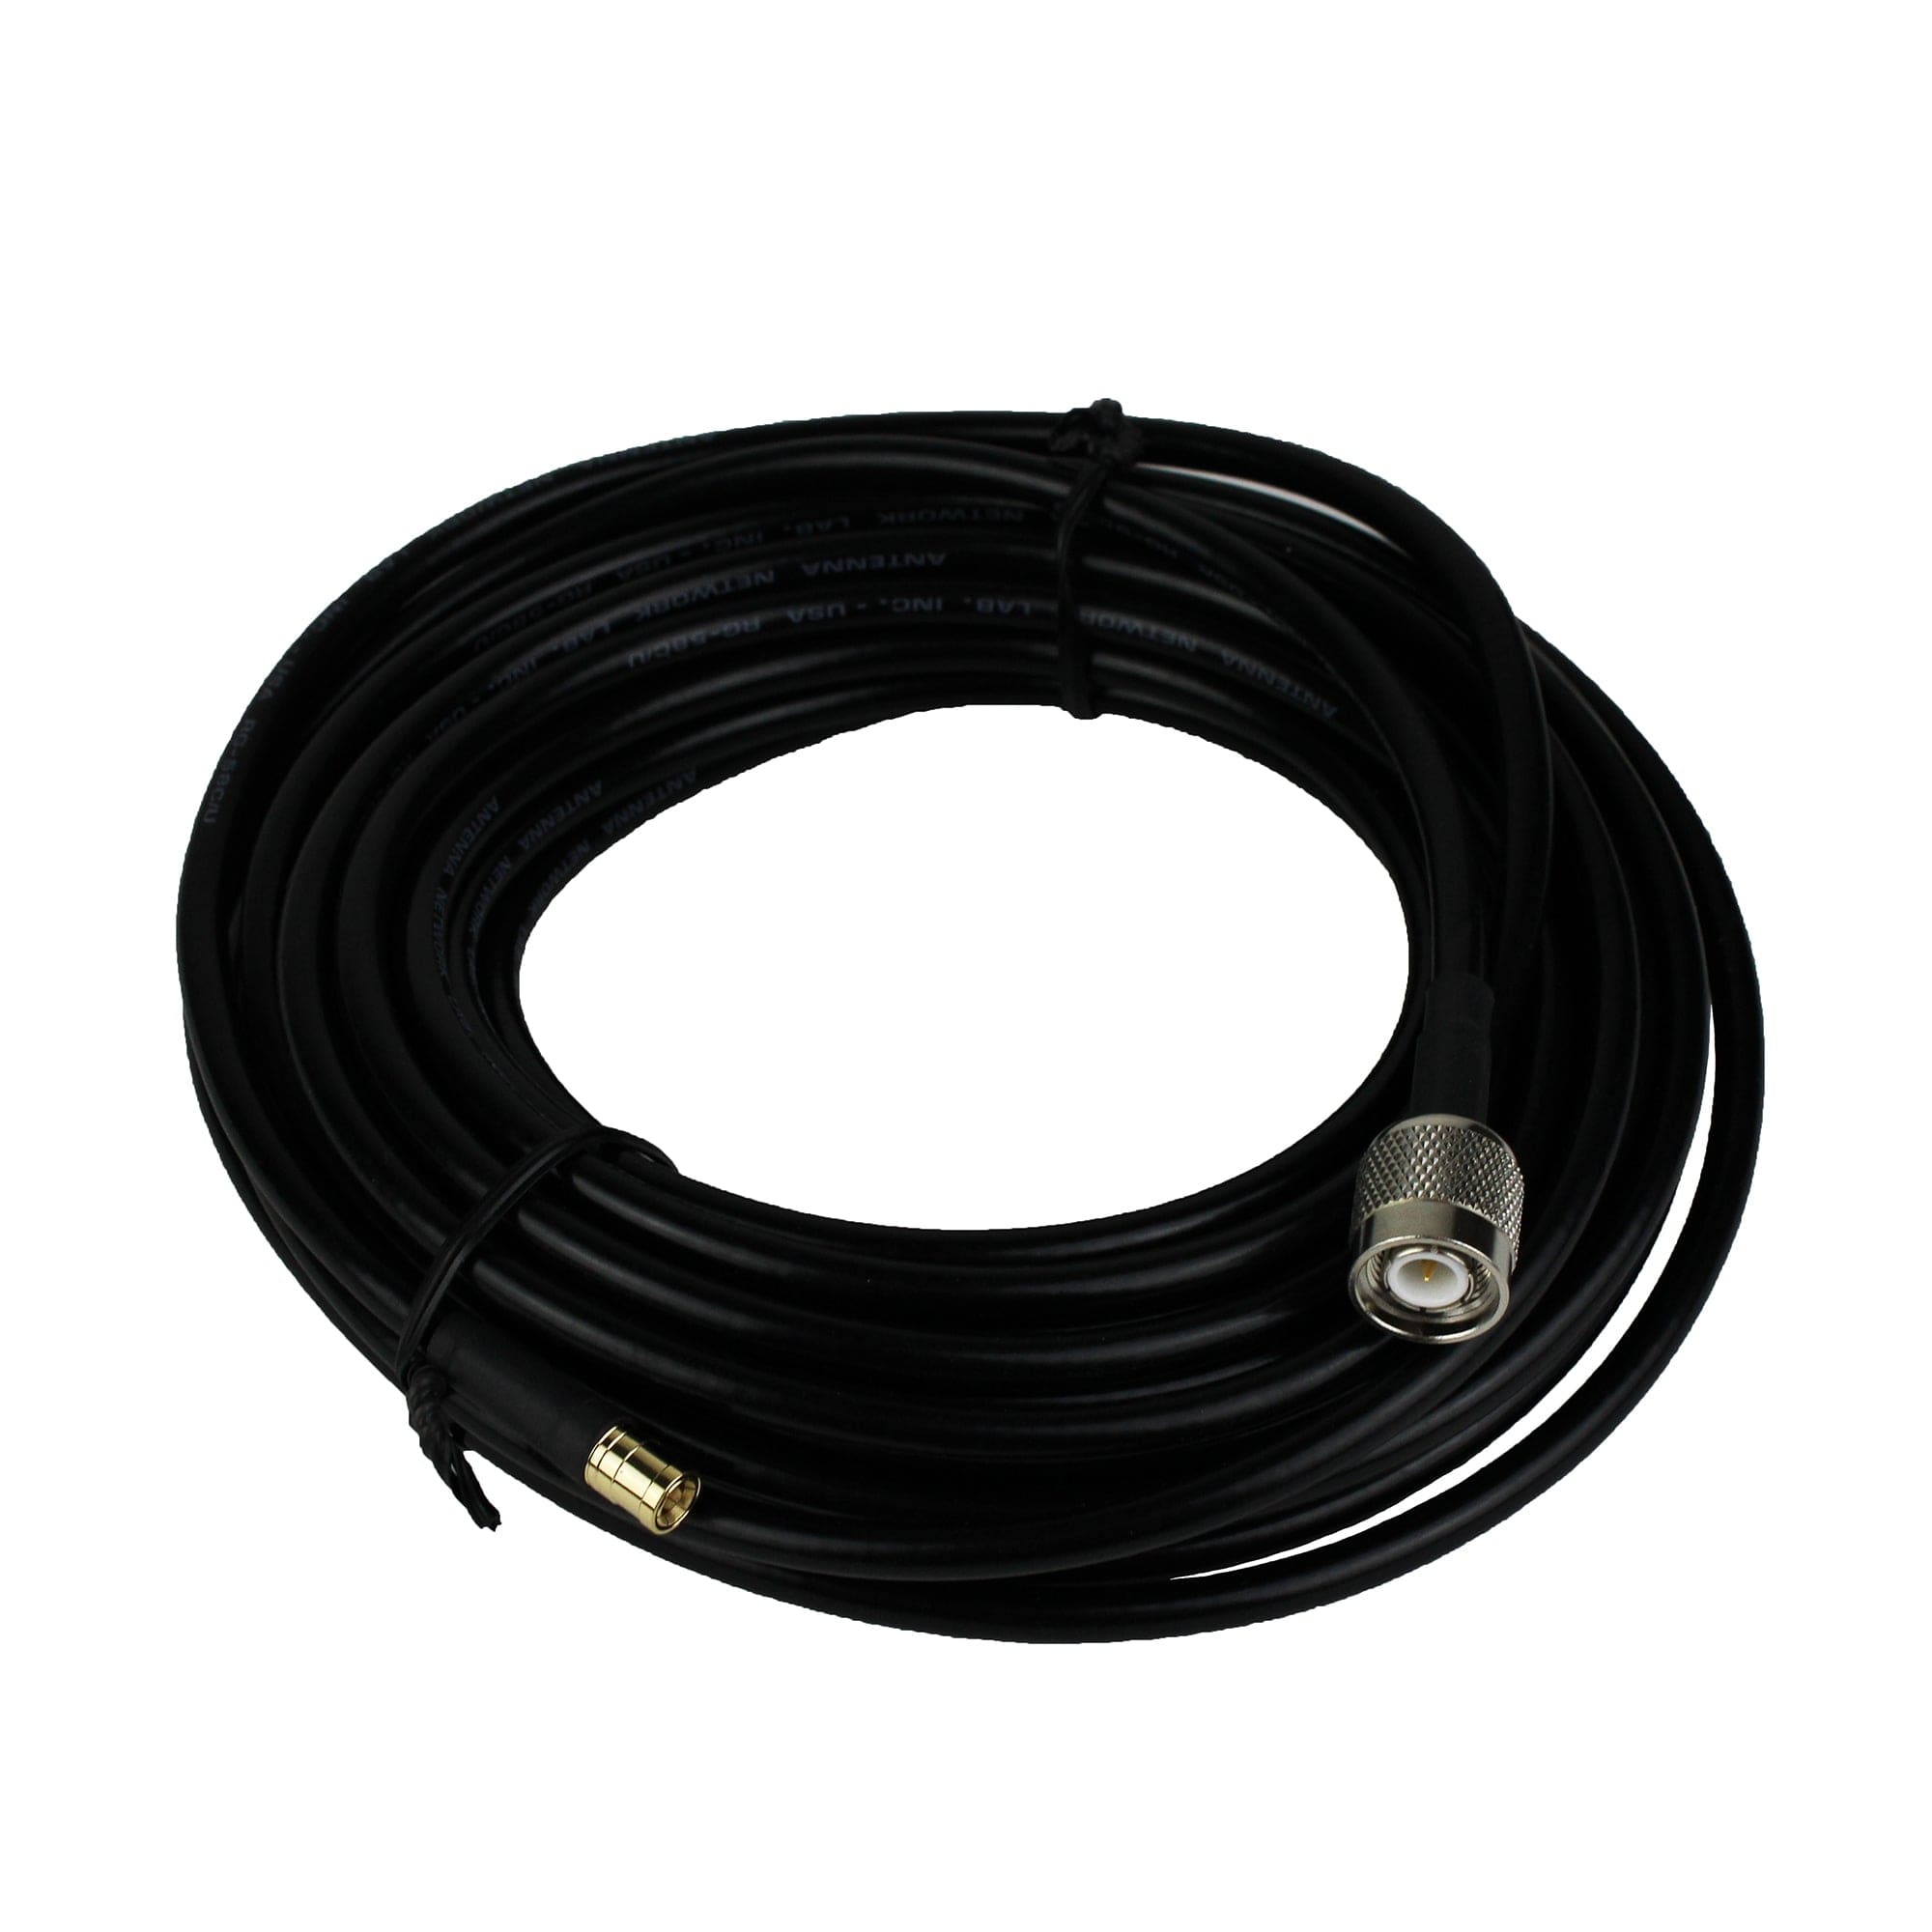 Shakespeare SRC-35 RG-58 35' SiriusXM Antenna Cable Kit for SRA-25 & SRA-40